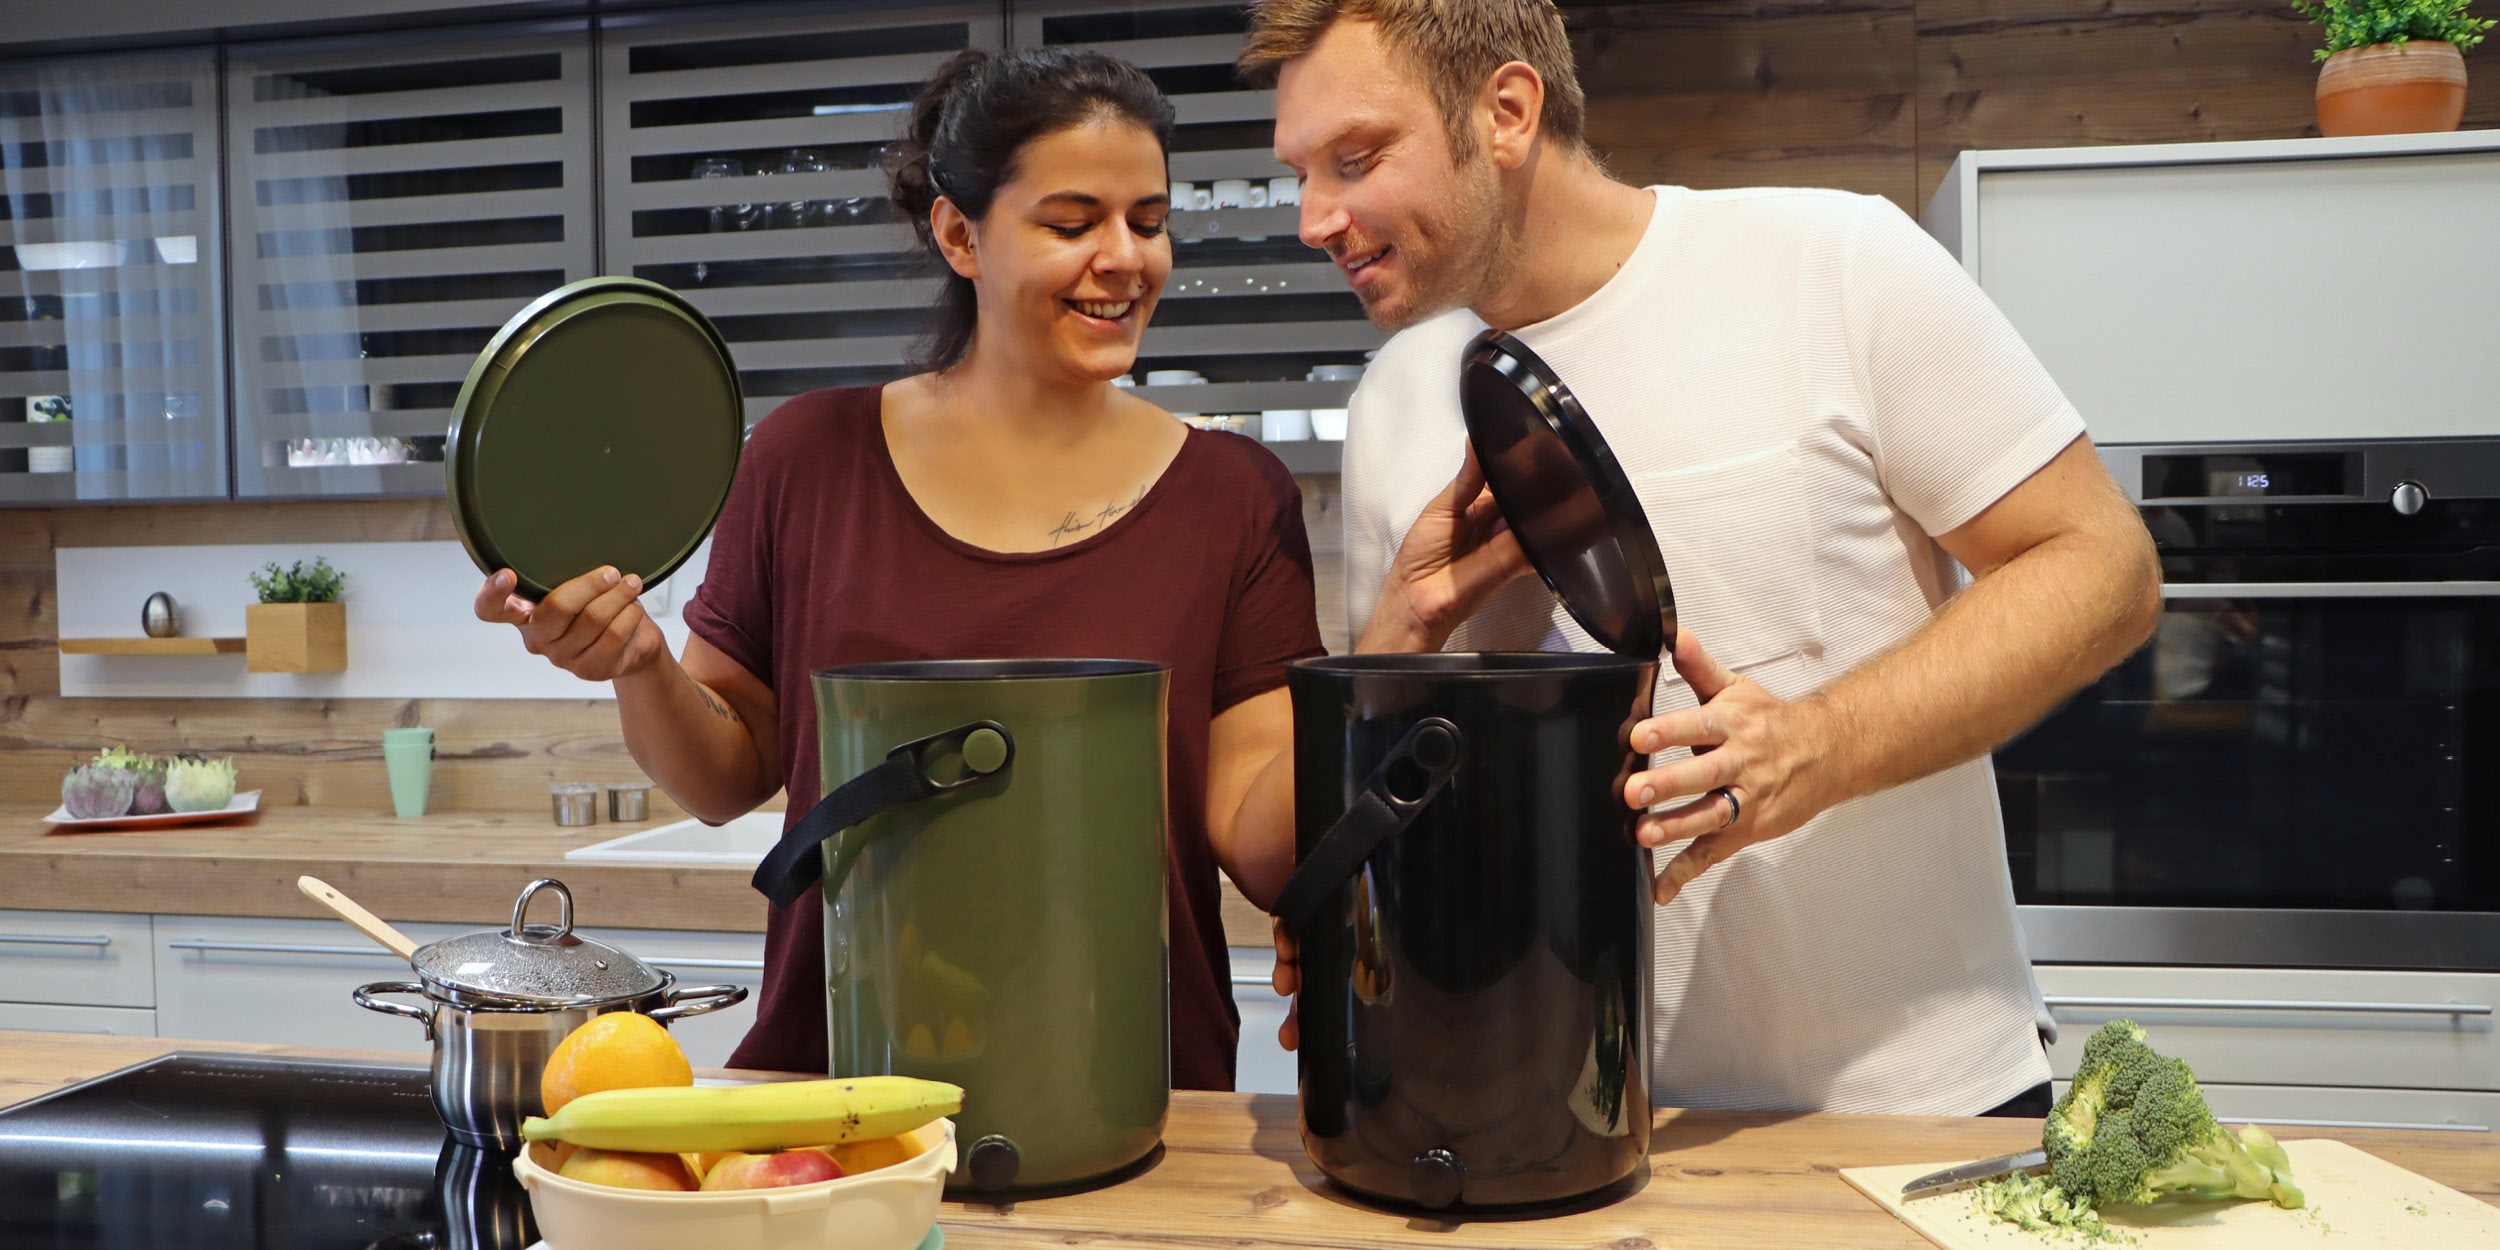 Become a true gardener by having 2 Bokashi Organko composters